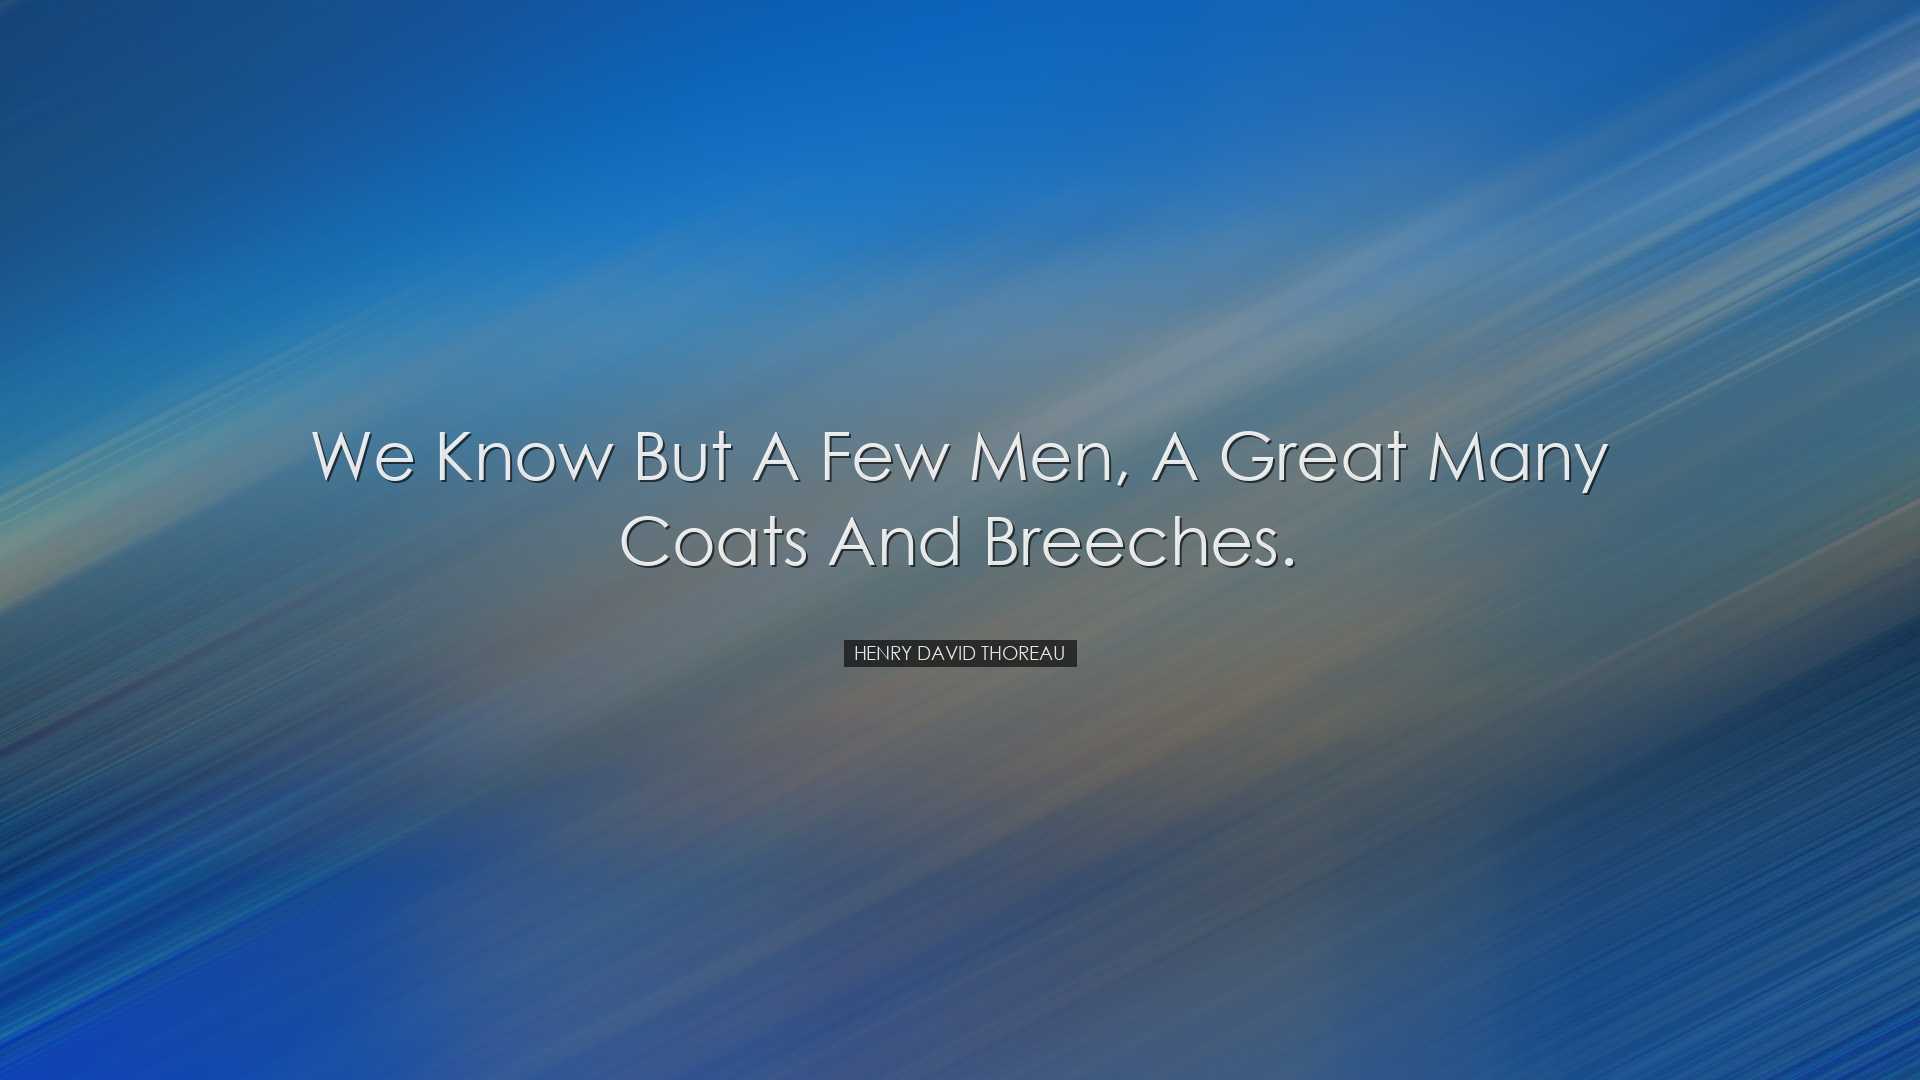 We know but a few men, a great many coats and breeches. - Henry Da